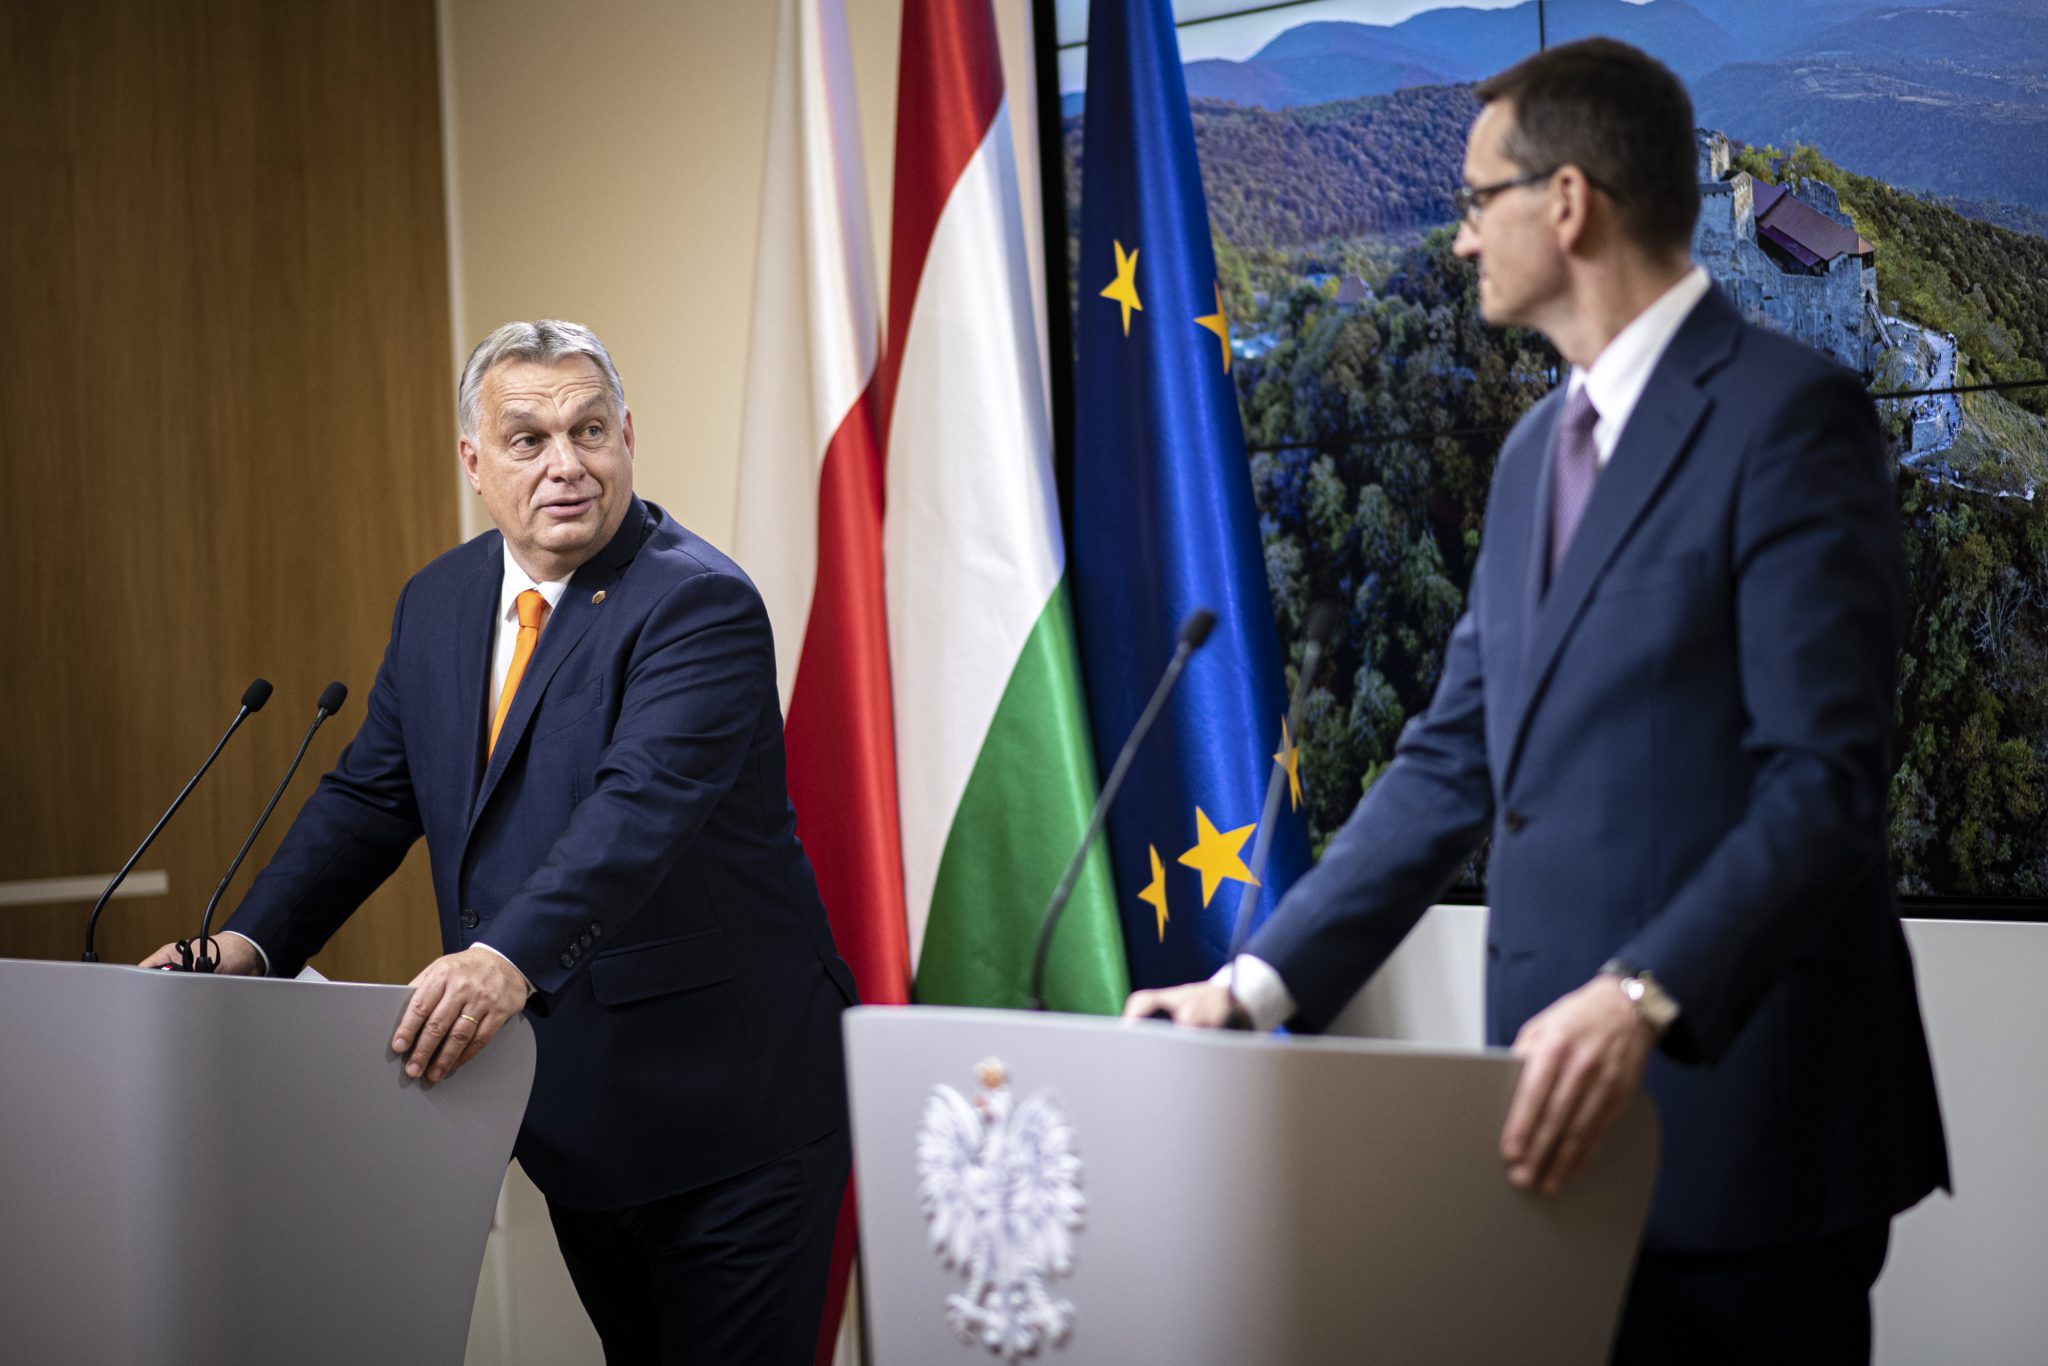 Polish-Hungarian Cooperation Continues Despite Differences